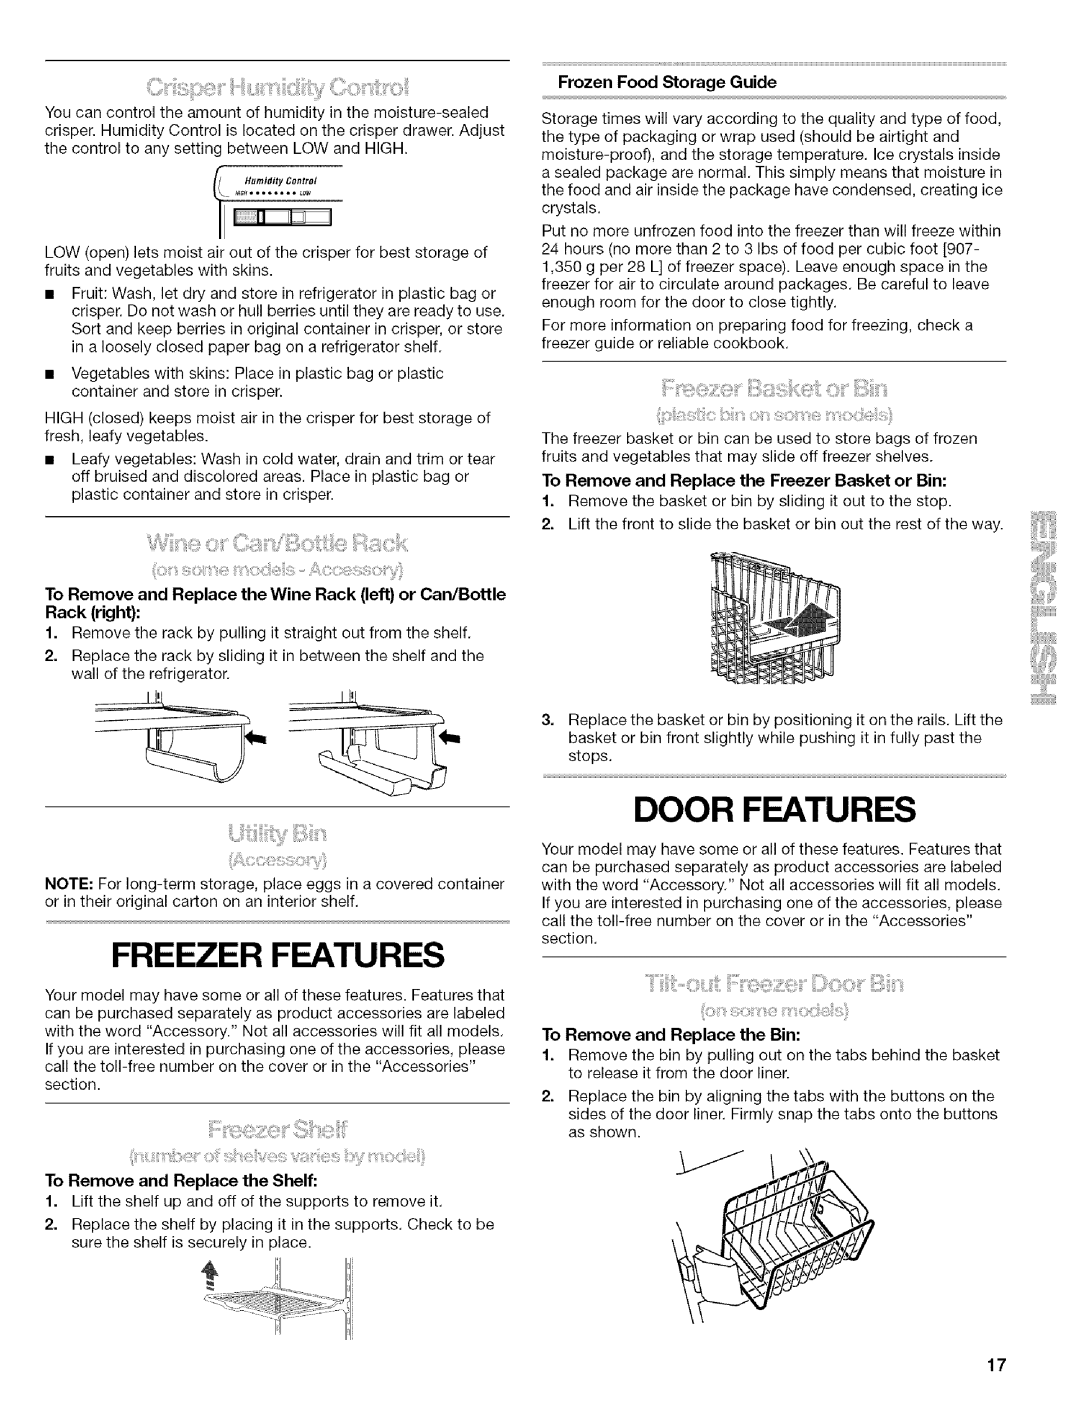 Kenmore 10656706500, Elite Freezer Features, Door Features, Frozen Food Storage Guide, To Remove and Replace the Shelf 